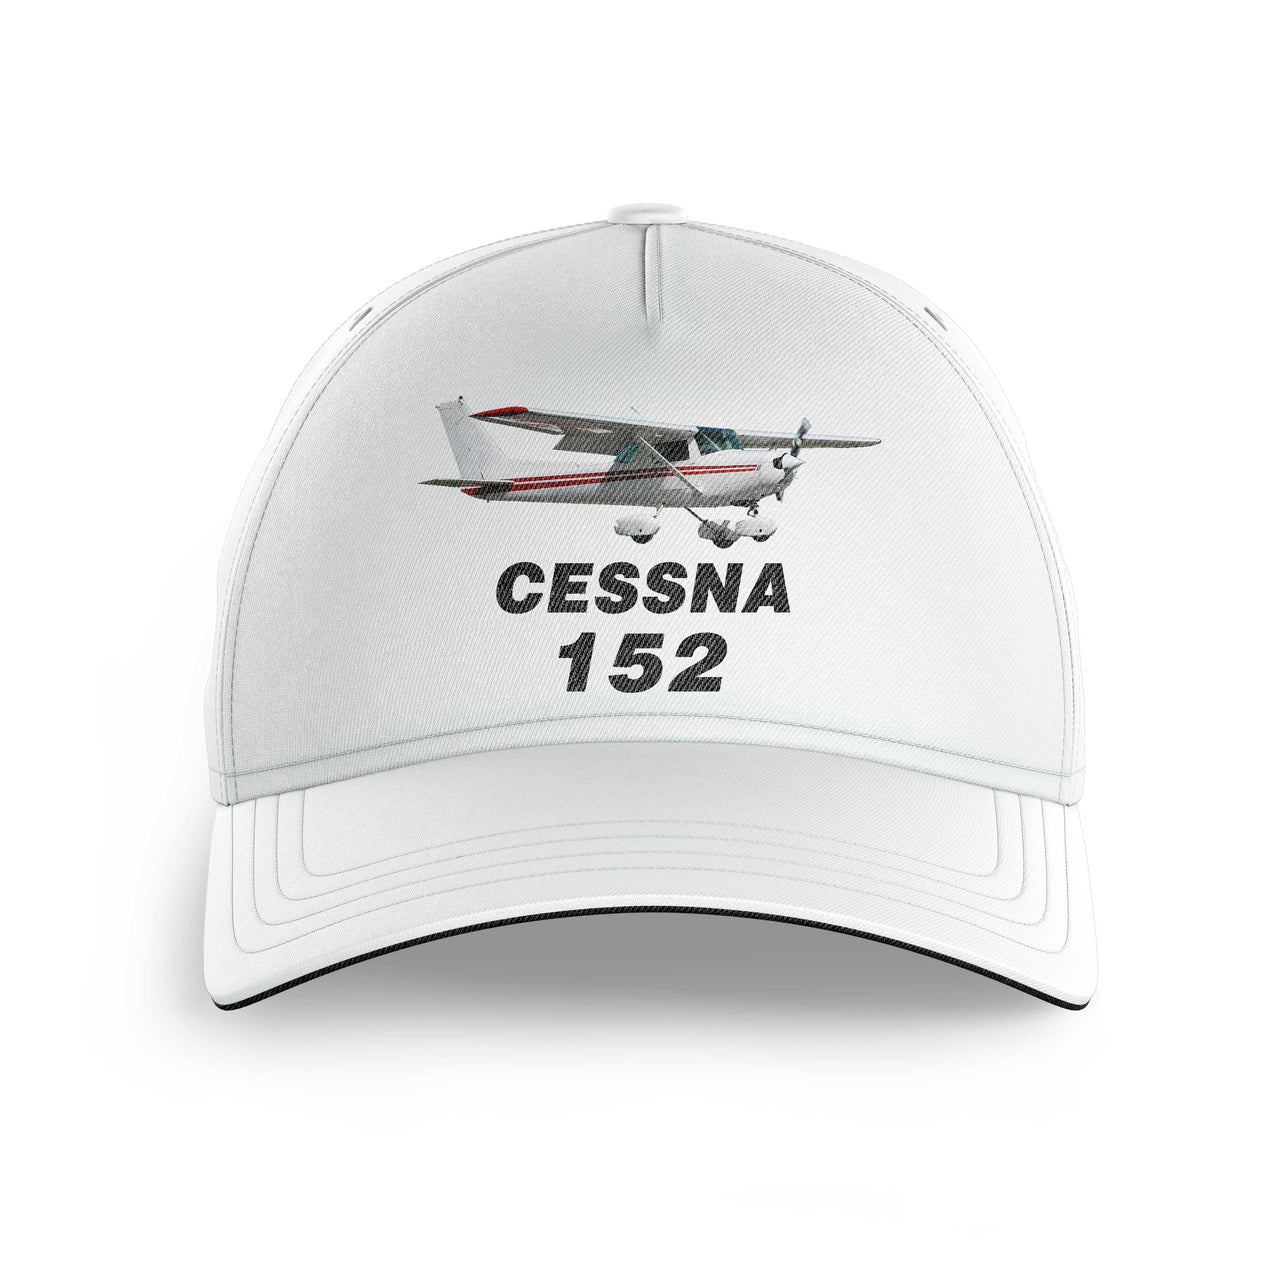 The Cessna 152 Printed Hats